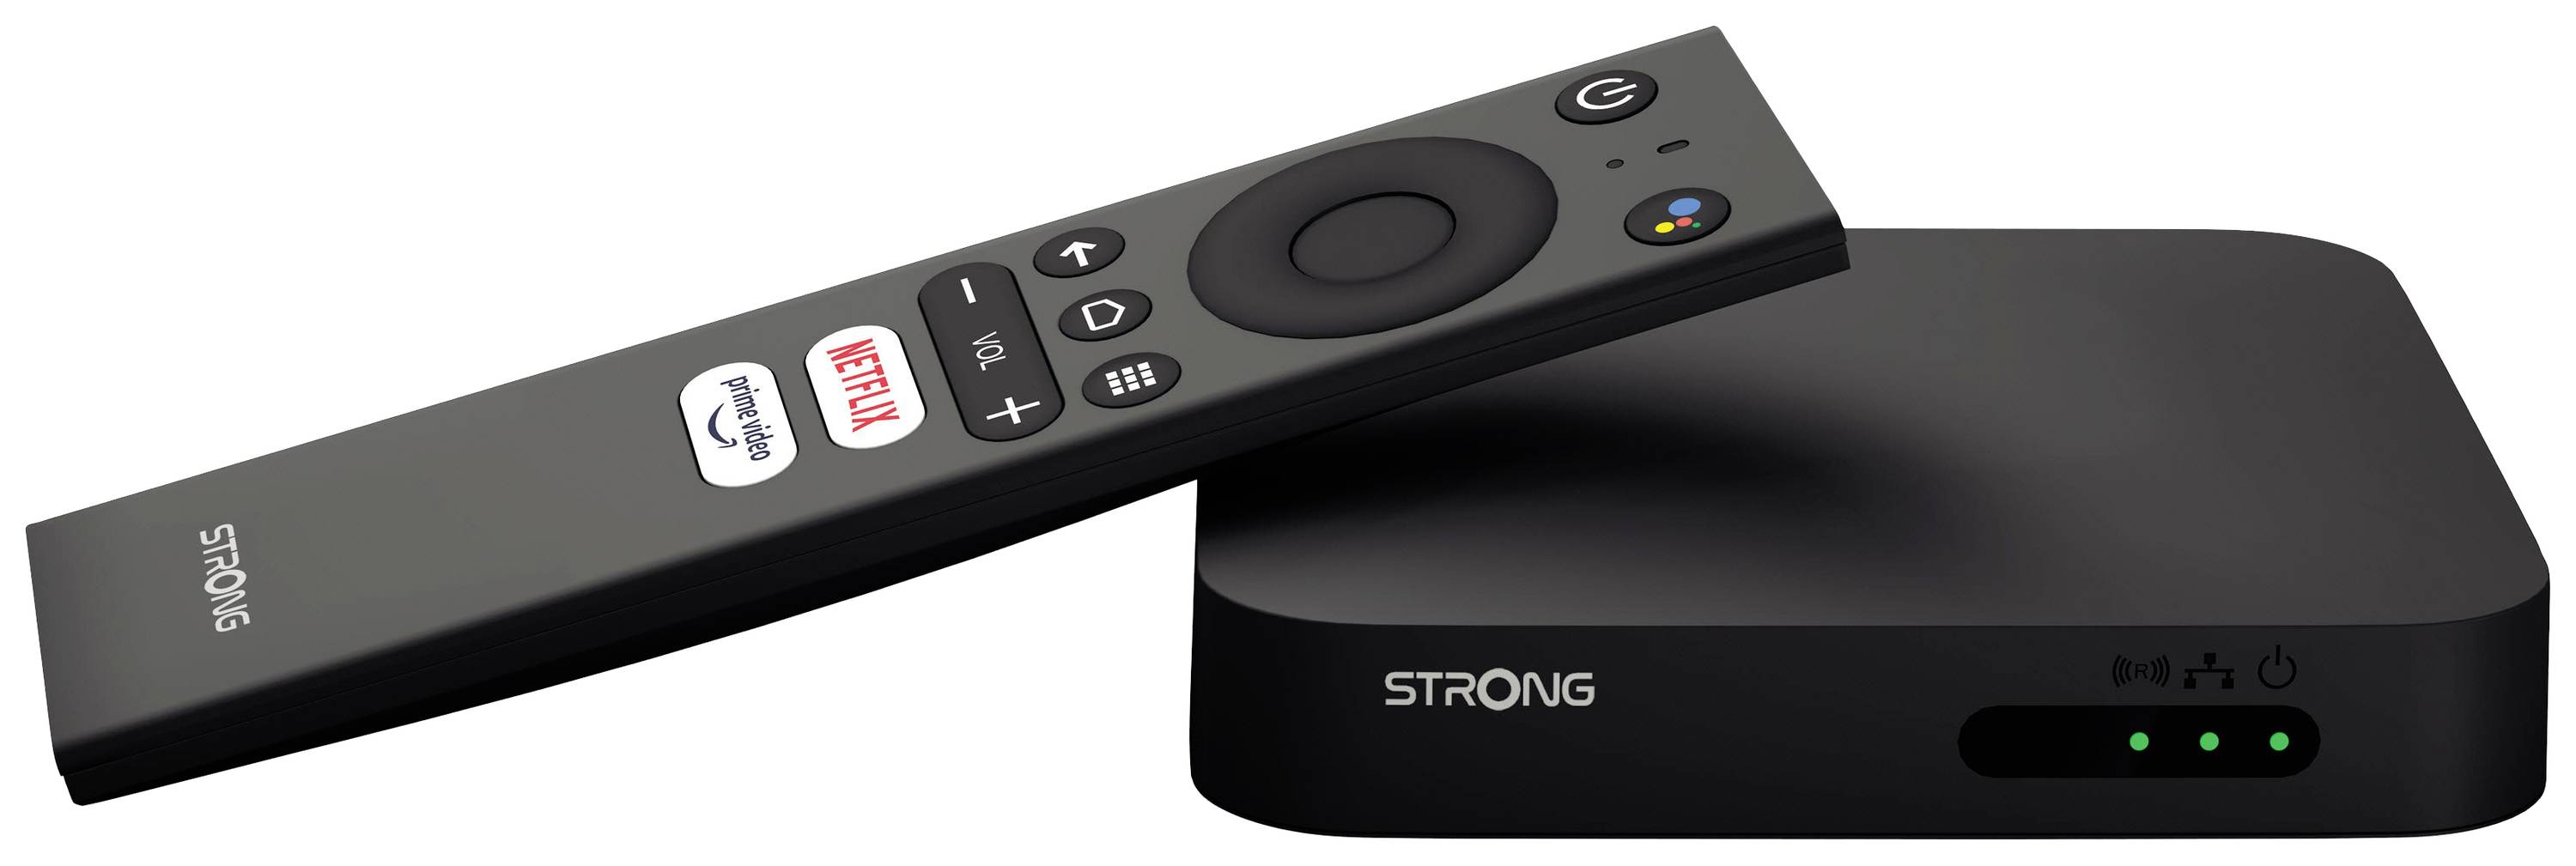 Strong LEAP-S3 Streaming box 4K, HDR, Network compatibility